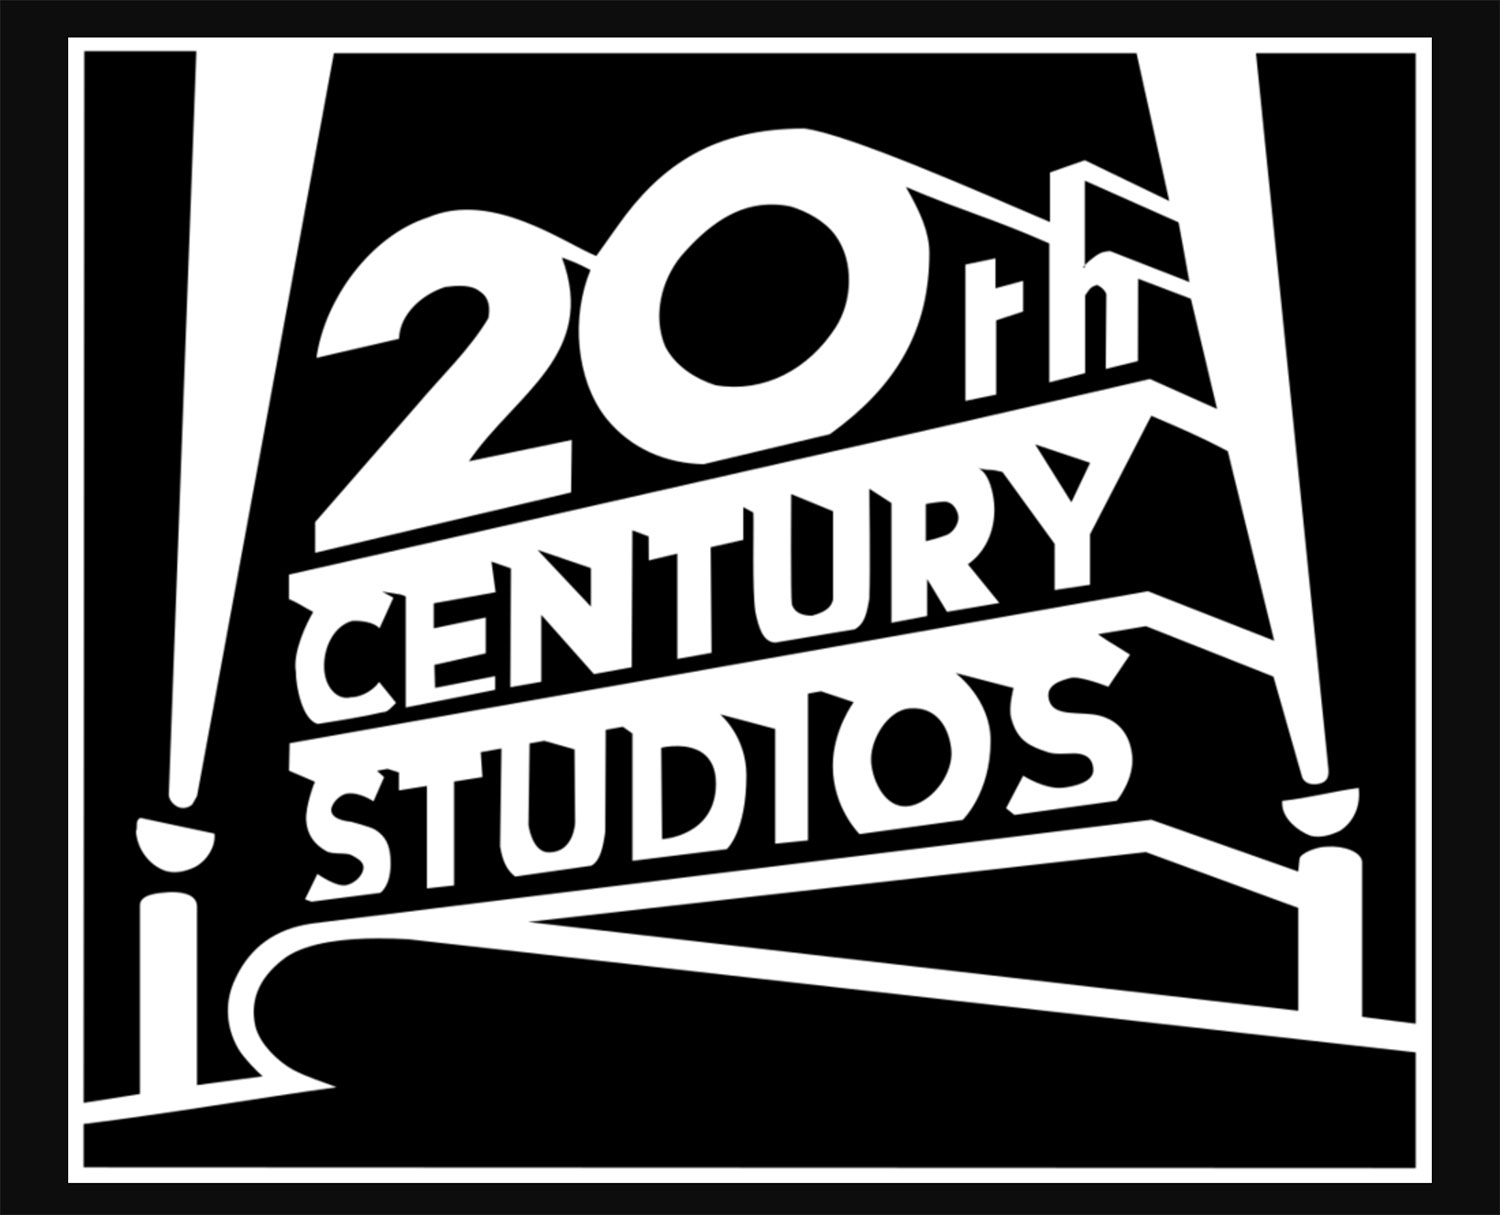 20th Century Studios logo: Disney just released a new opening